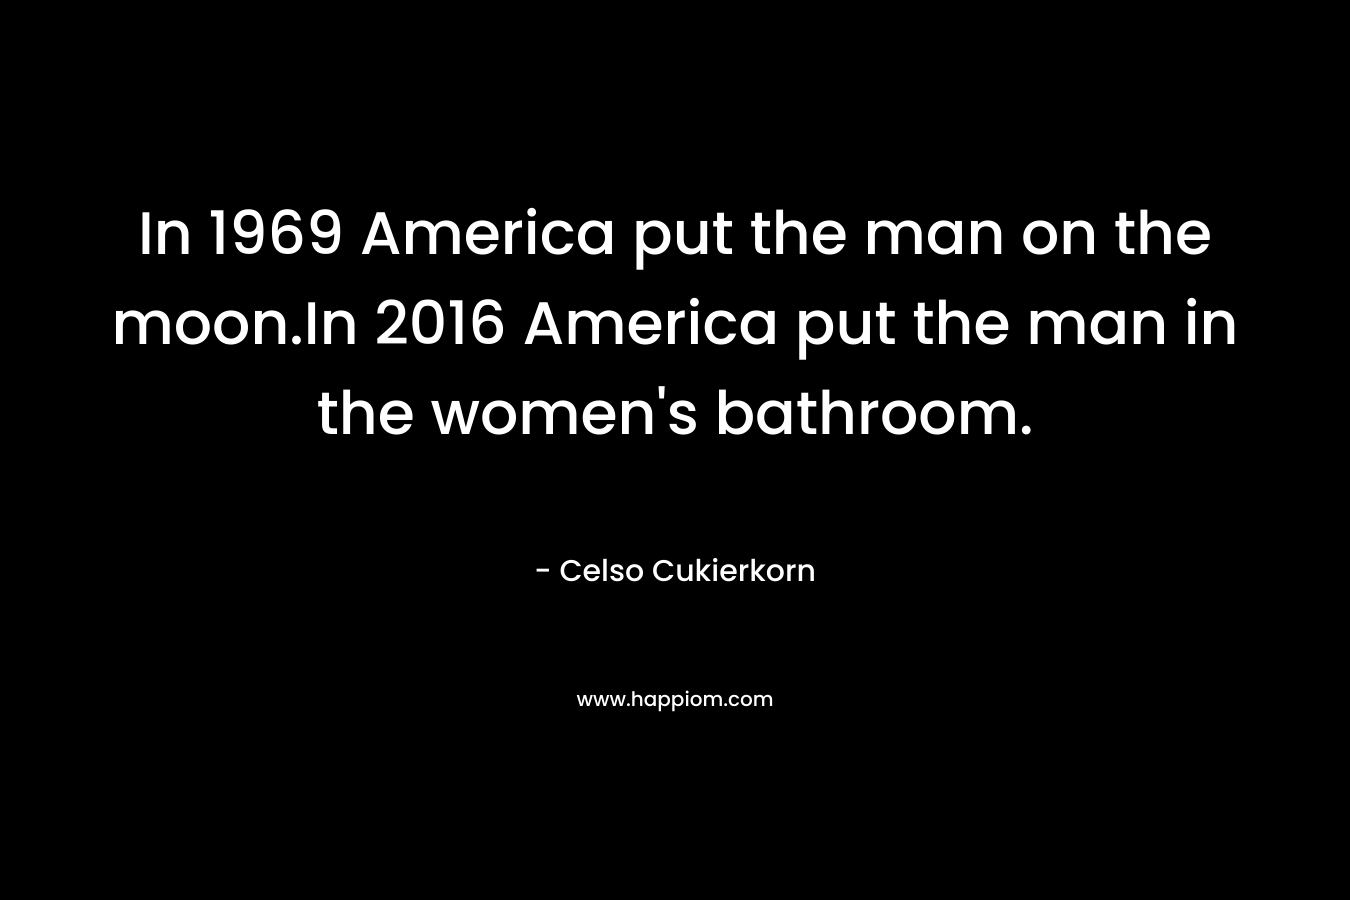 In 1969 America put the man on the moon.In 2016 America put the man in the women’s bathroom. – Celso Cukierkorn